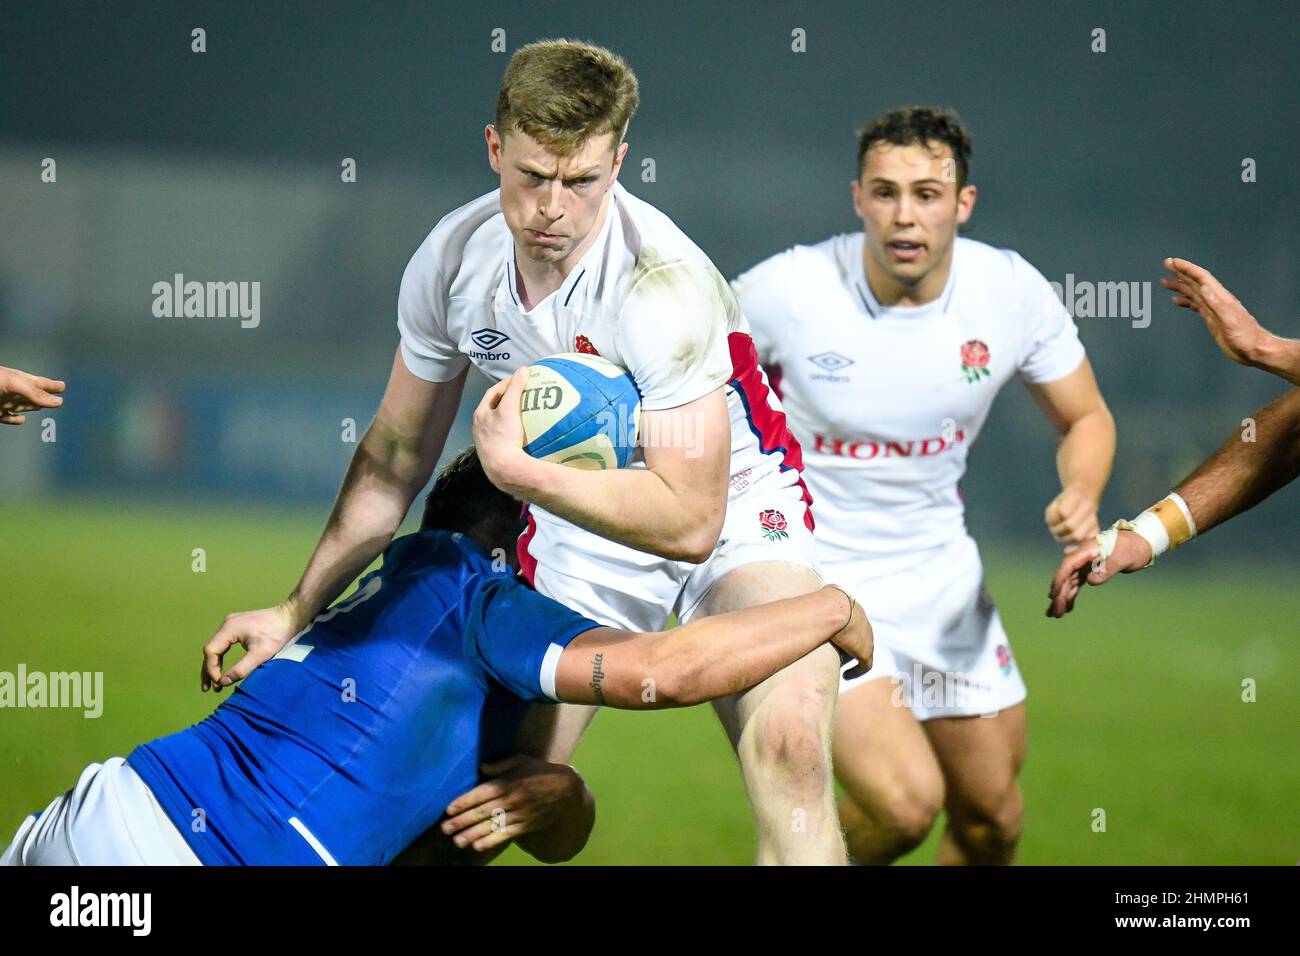 Treviso, Italy. 11th Feb, 2022. Francis Moore (England) tackled by Frangini  Lapo (Italy) during 2022 Six Nations Under 20 - Italy vs England, Rugby Six  Nations match in Treviso, Italy, February 11